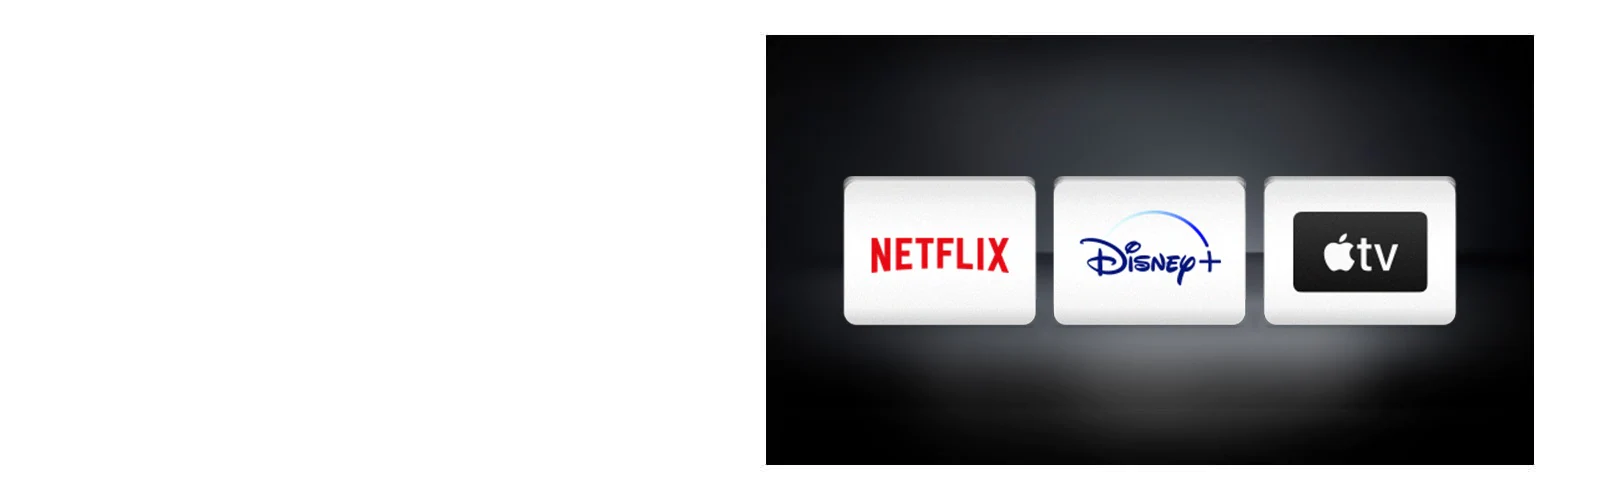 The Netflix logo, the Apple TV logo are arranged horizontally in the black background.